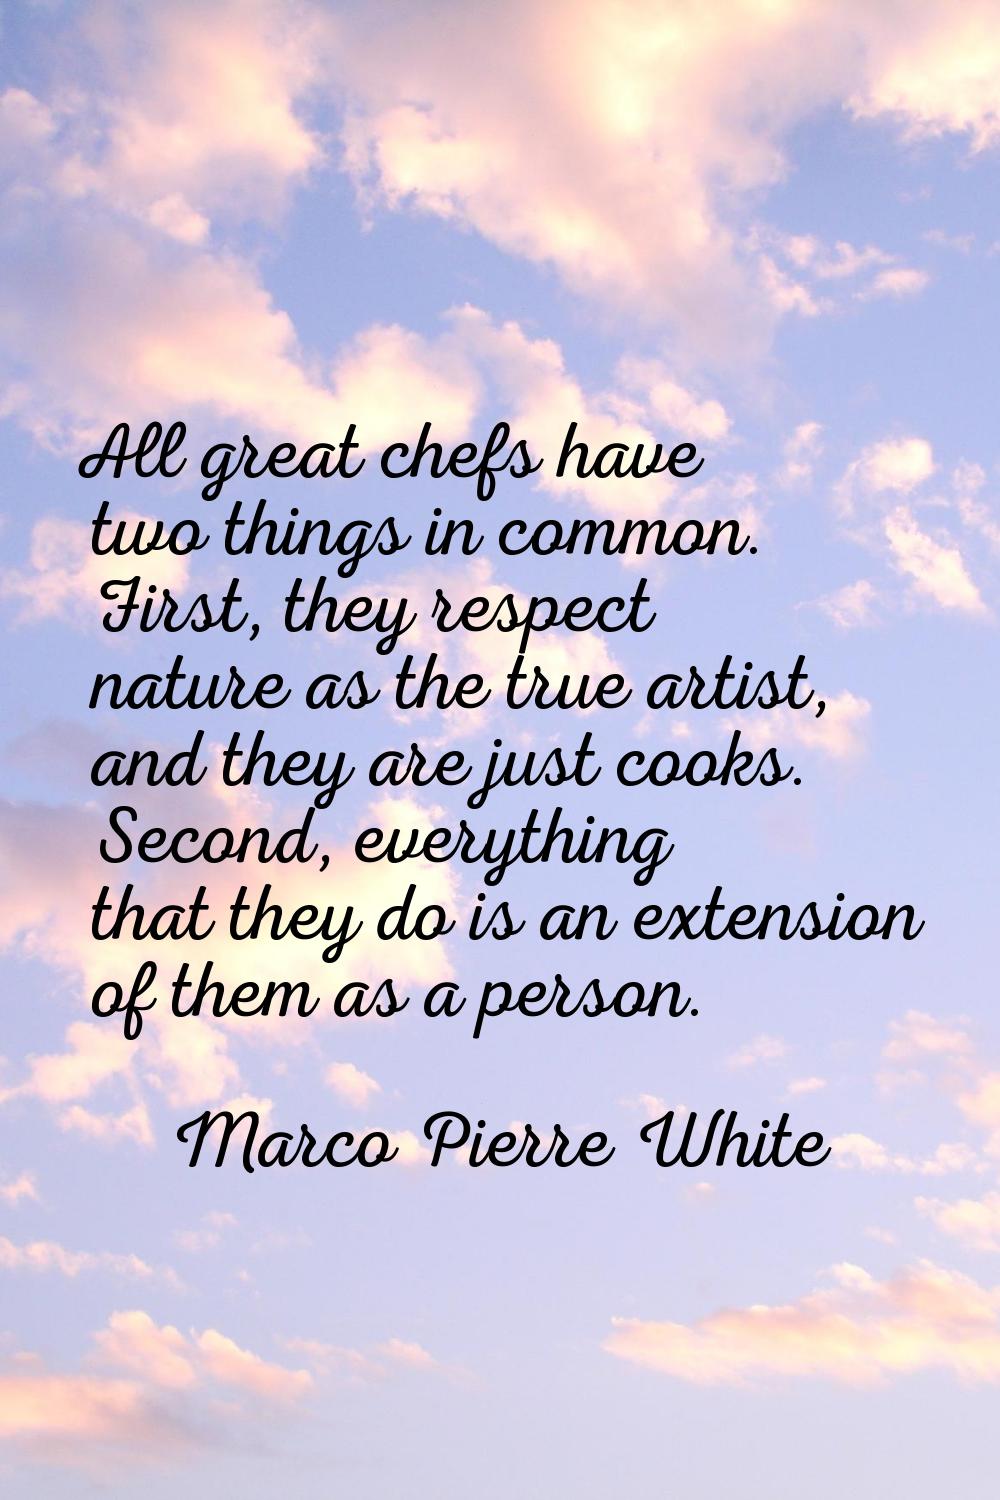 All great chefs have two things in common. First, they respect nature as the true artist, and they 